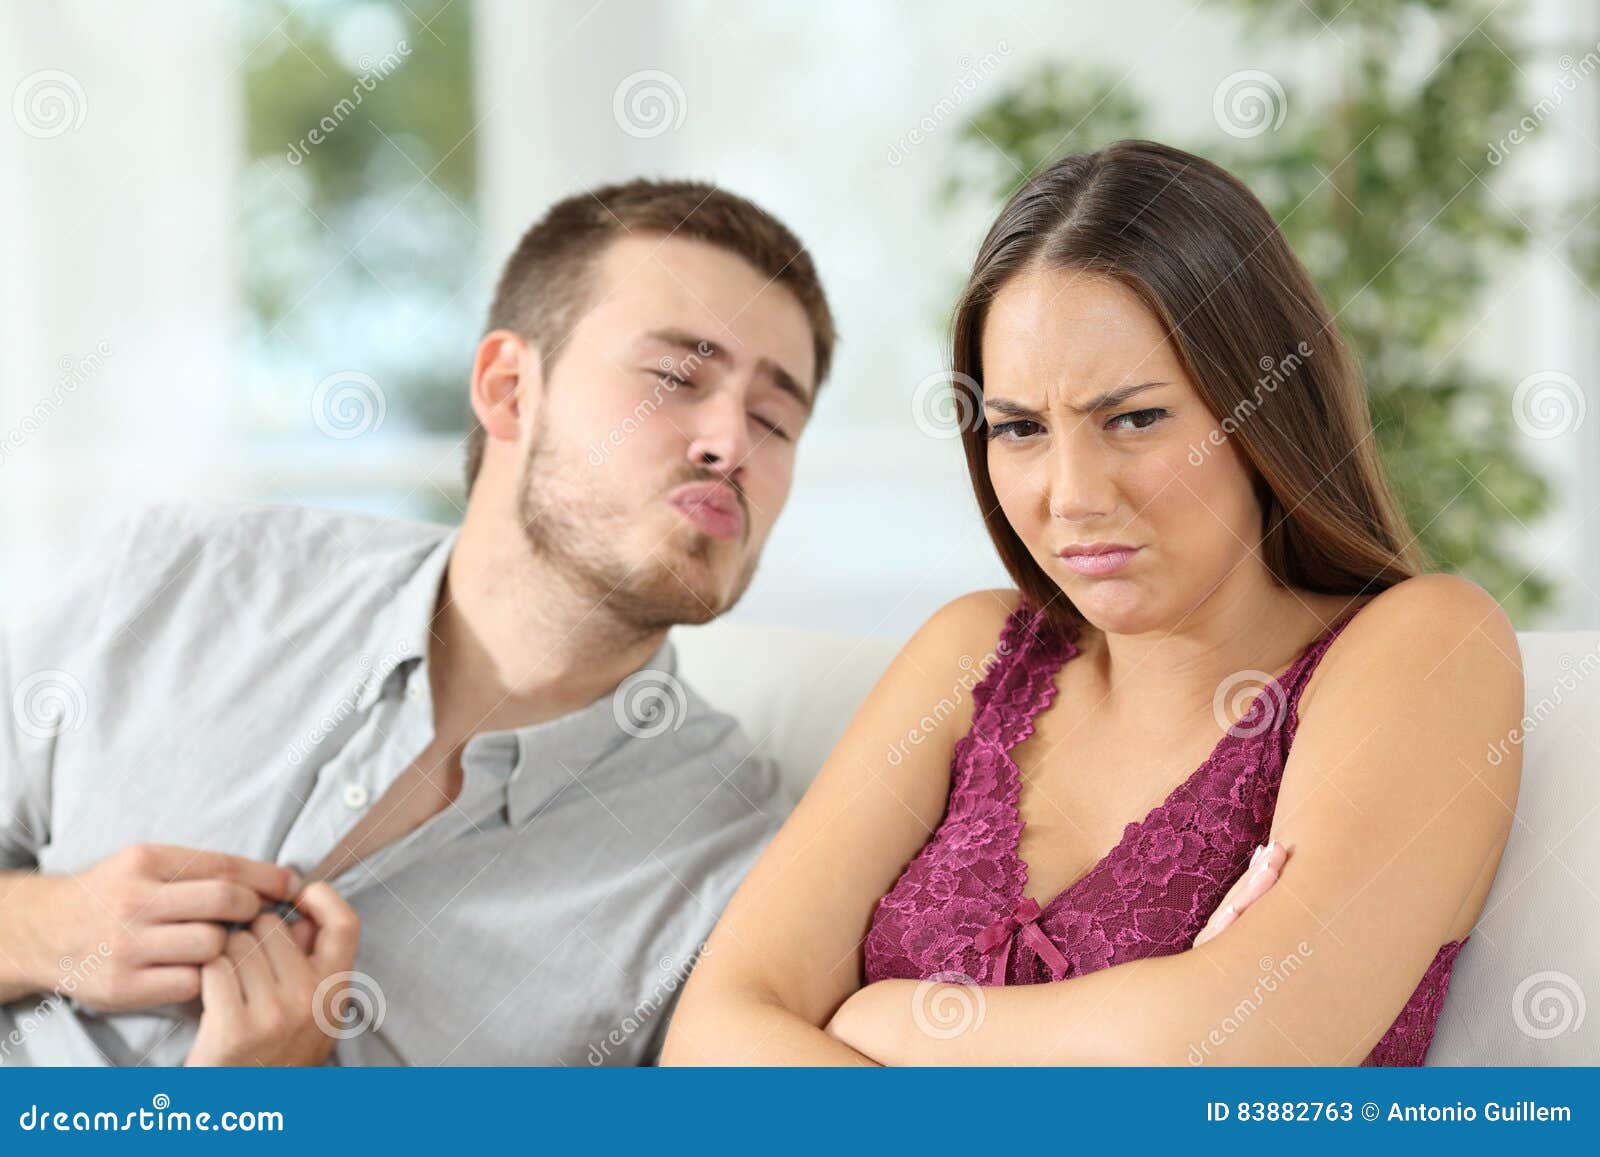 Angry Woman Rejecting a Sex Offer from Her Boyfriend Stock Image